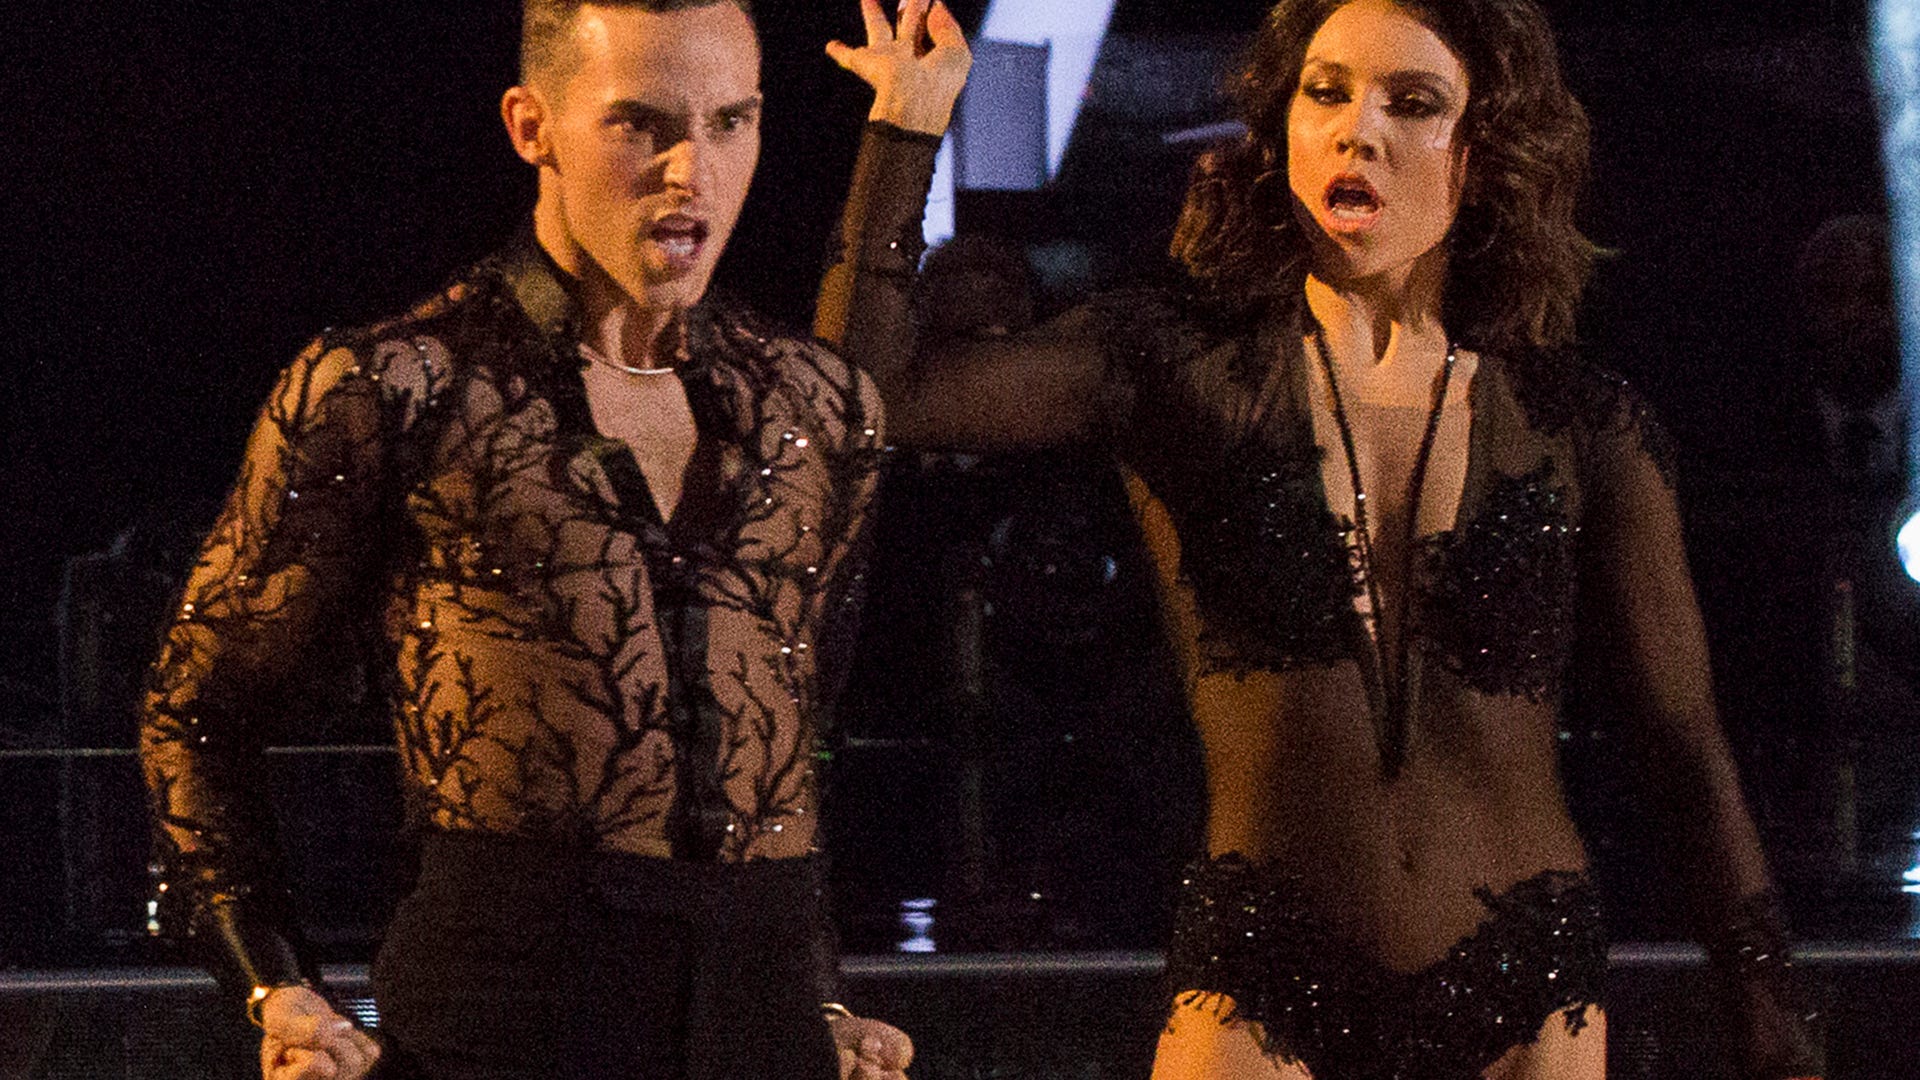 Adam Rippon and Jenna Johnson, Dancing with the Stars